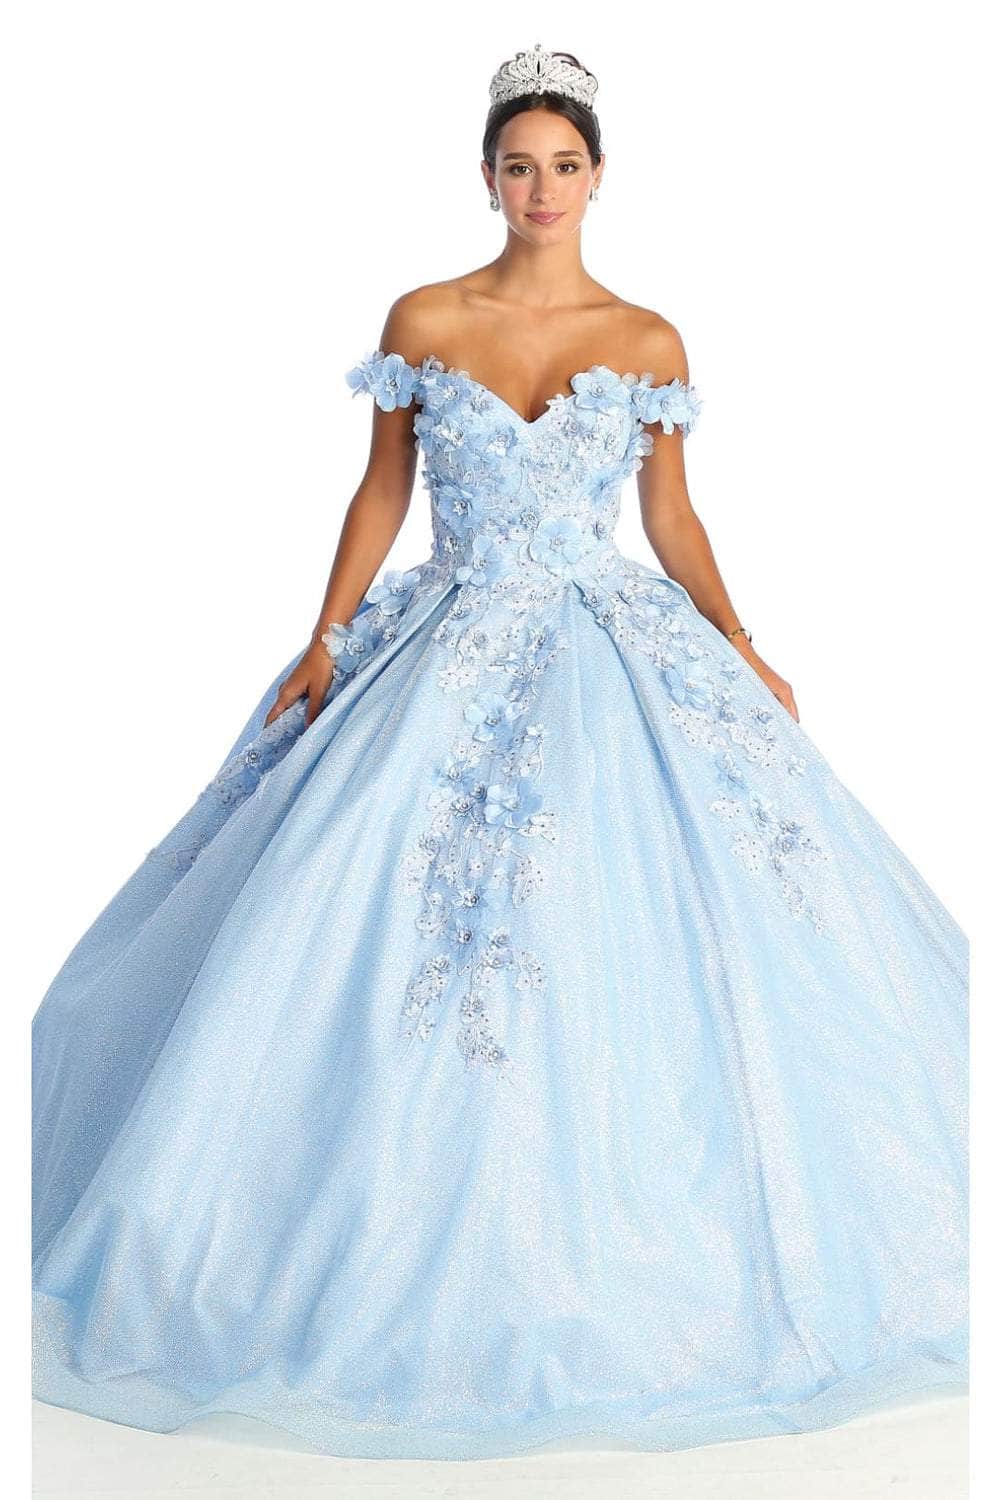 Image of May Queen LK154 - Floral Applique Ballgown